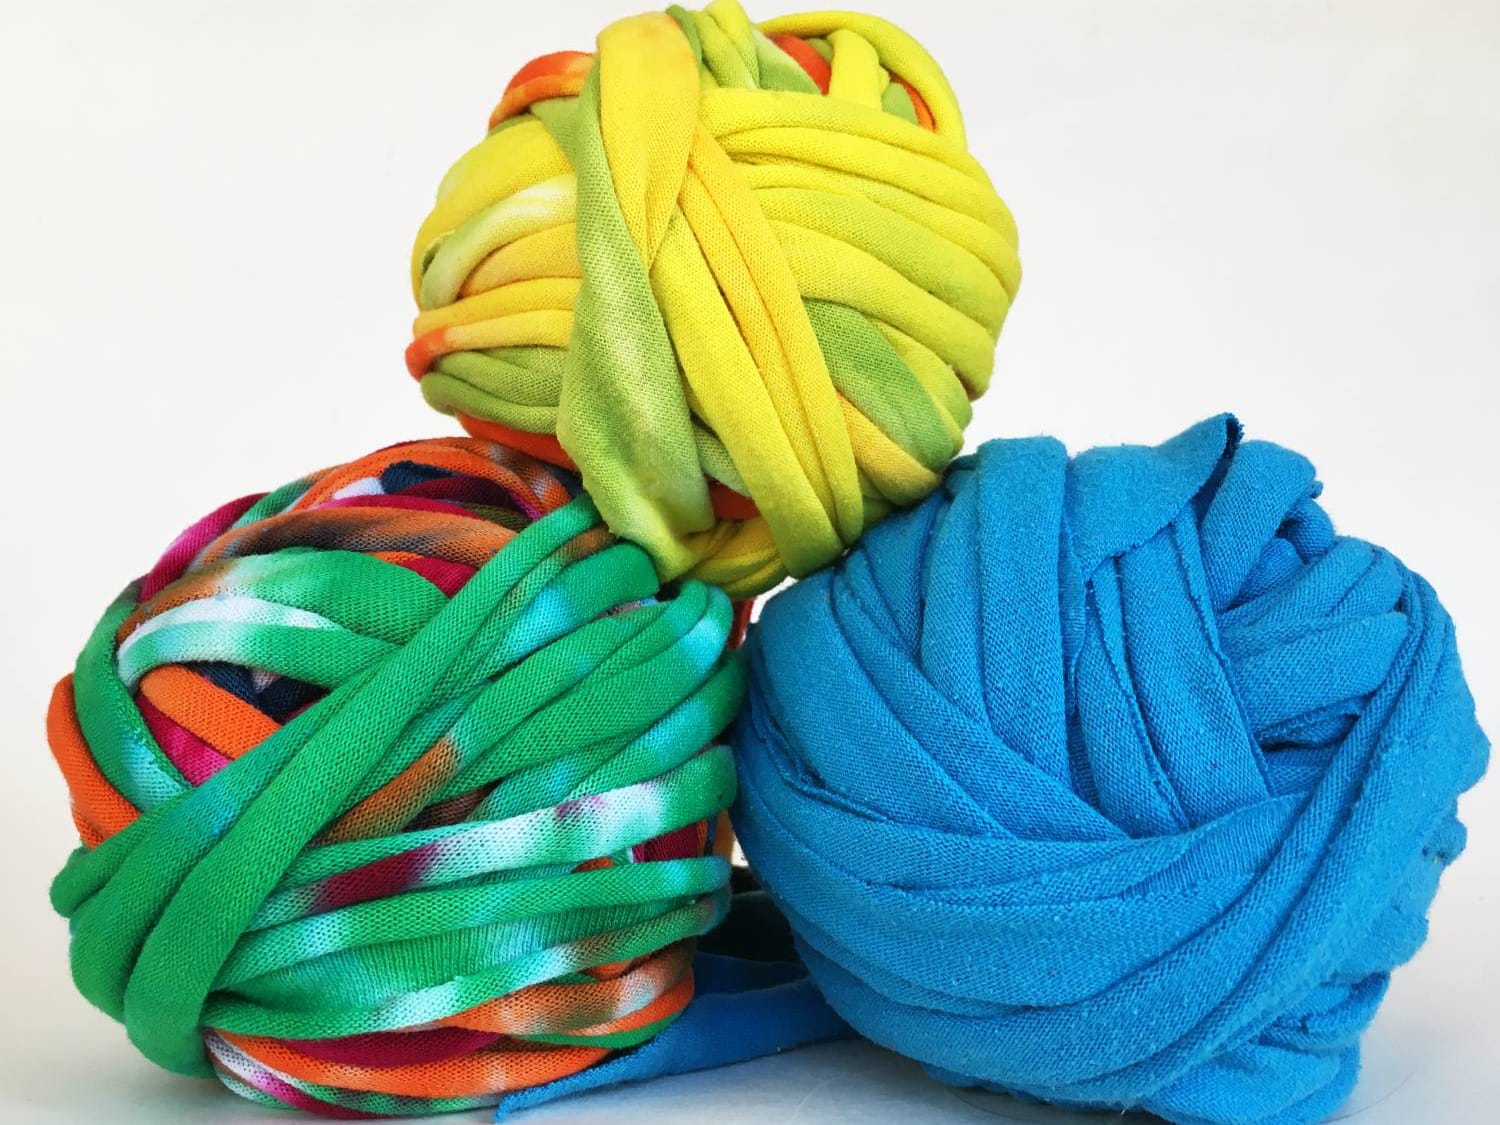 How to Make T-Shirt Yarn - The Kitchen Table Classroom